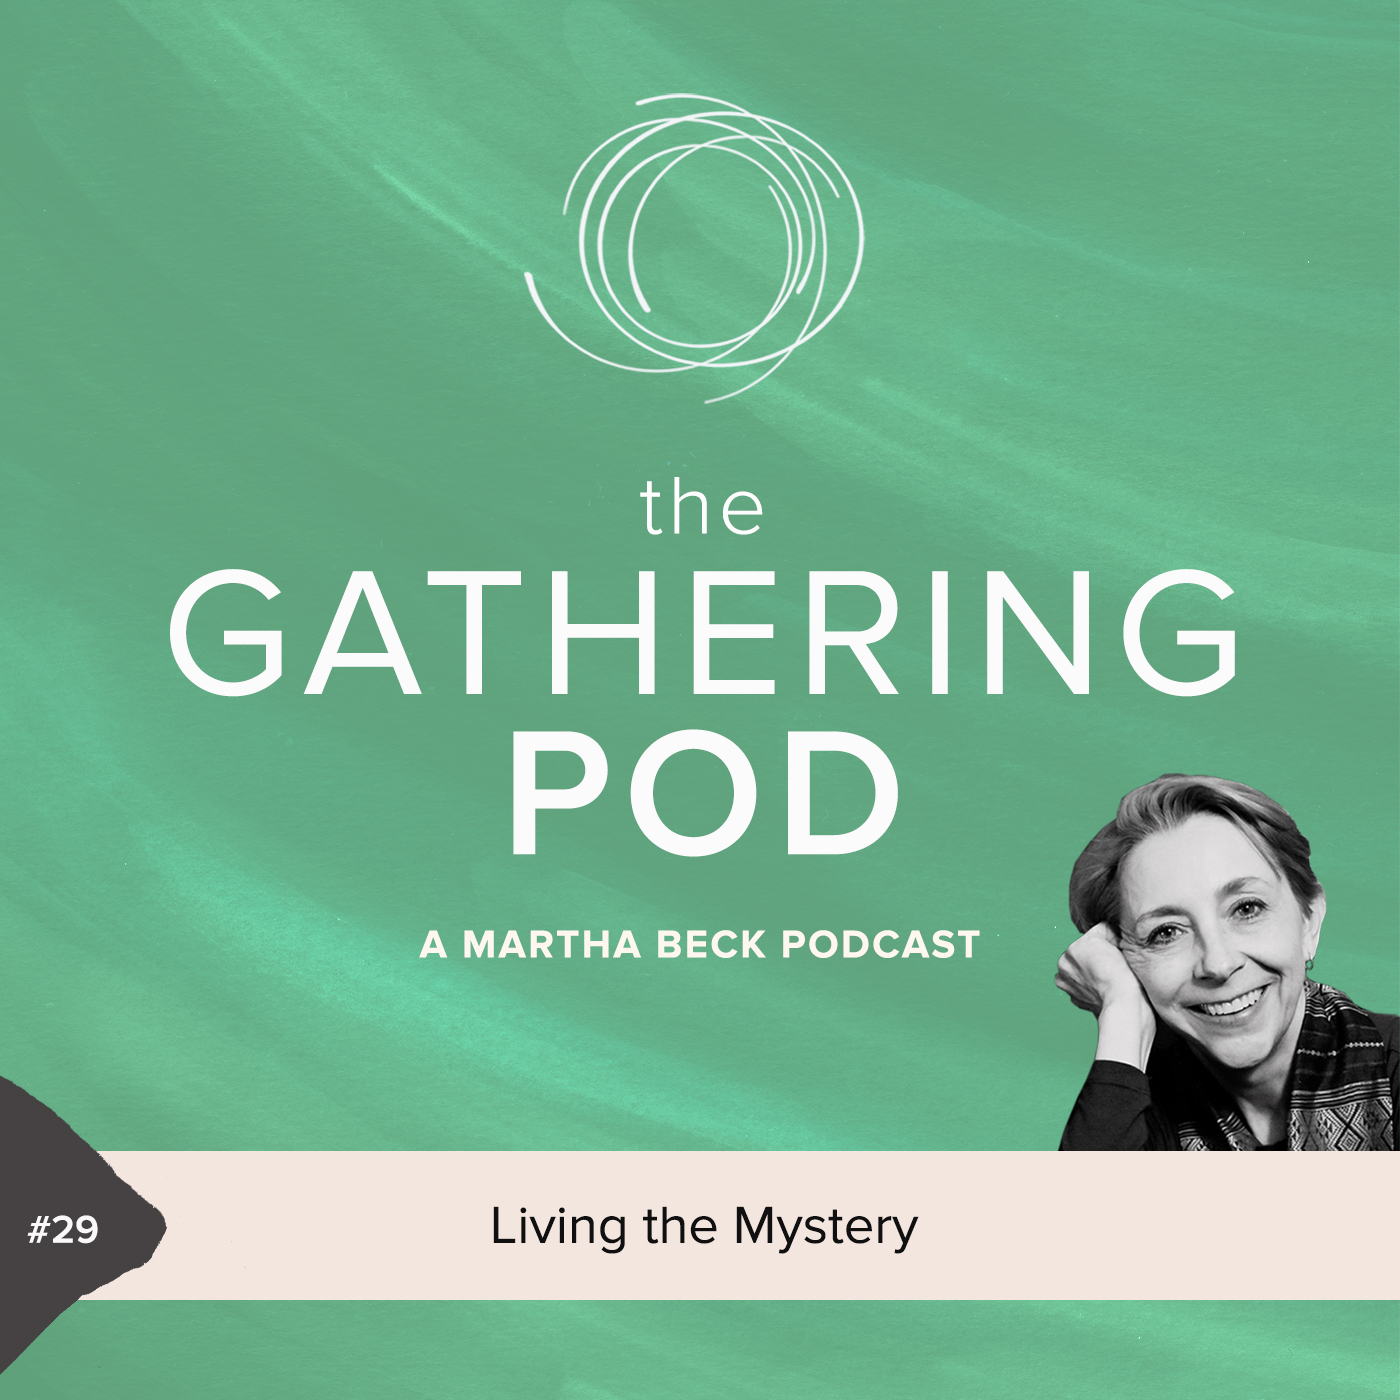 Image for The Gathering Pod A Martha Beck Podcast Episode #29 Living the Mystery